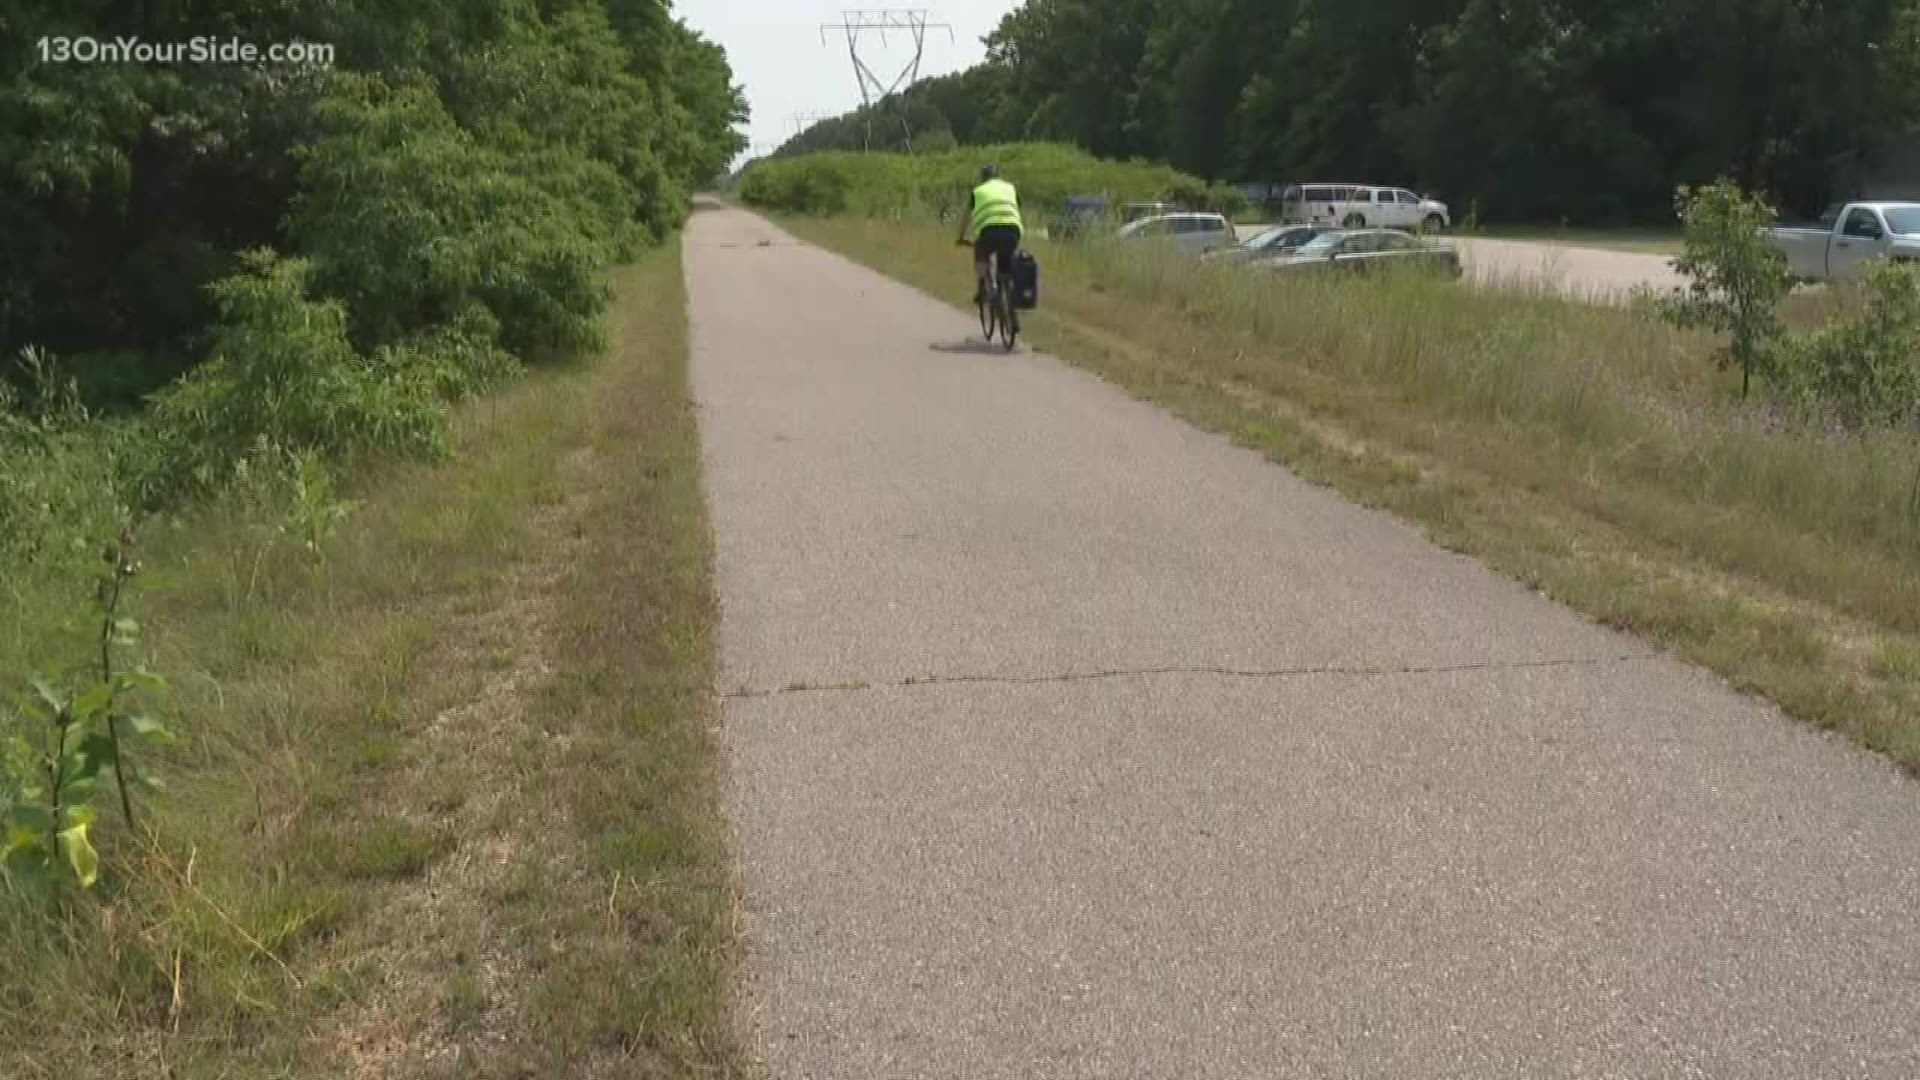 It will connect Muskegon's two longest bike trails.